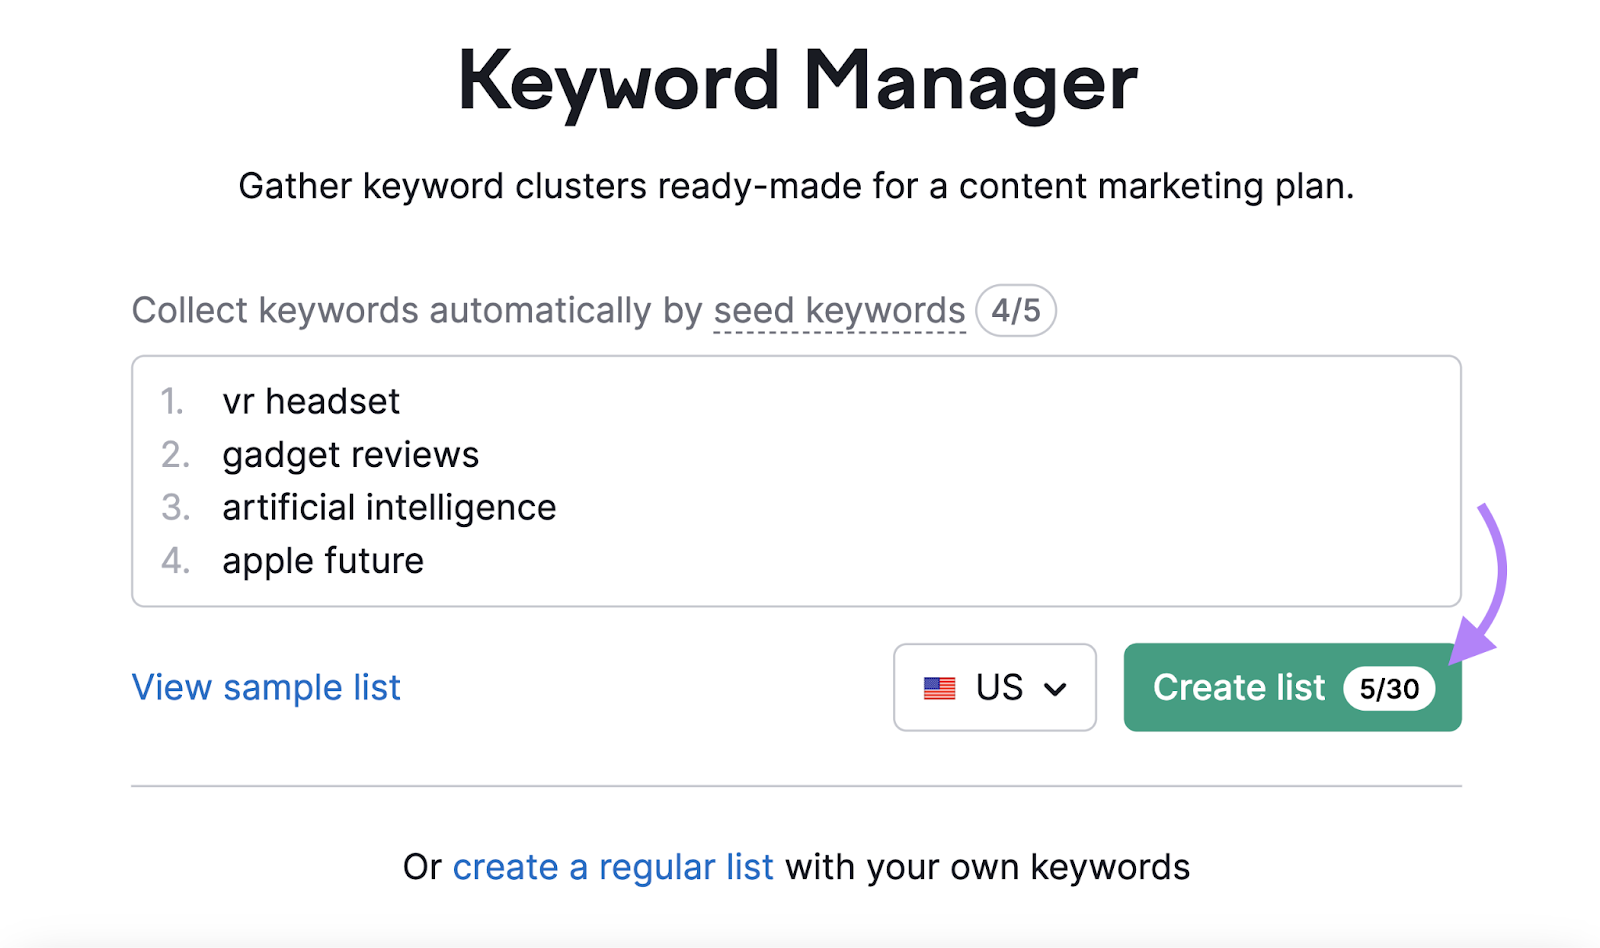 keywords like vr headset, gadget review, and artificial intelligence entered into keyword manager tool